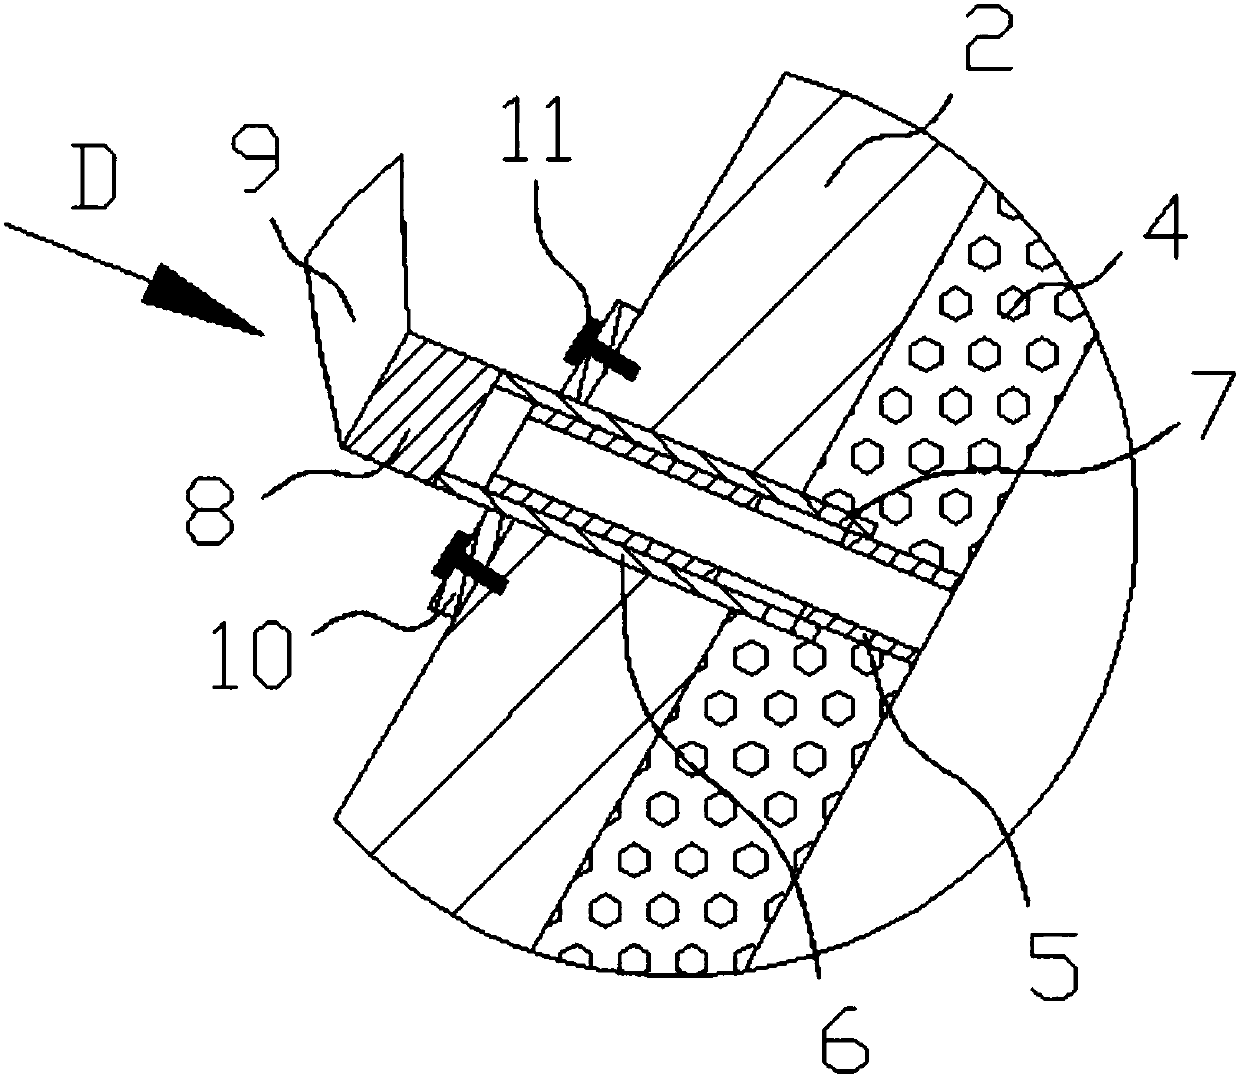 Toothpaste extruding mechanism capable of facilitating decoration and mounting